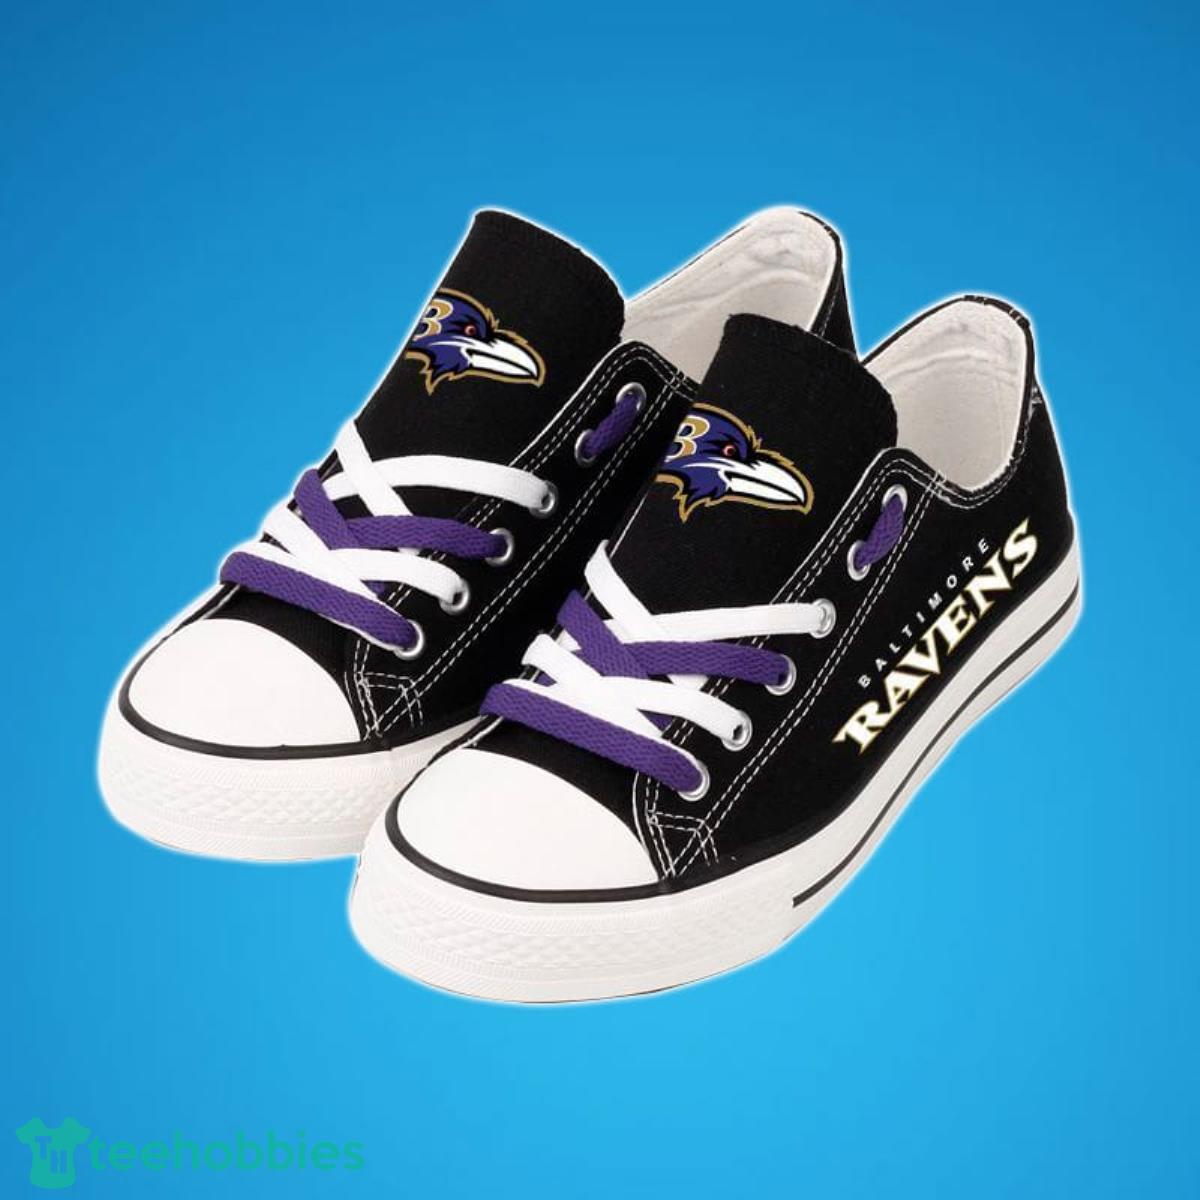 Baltimore Ravens New Low Top Shoes Best Gift For Men And Women Fans Product Photo 1